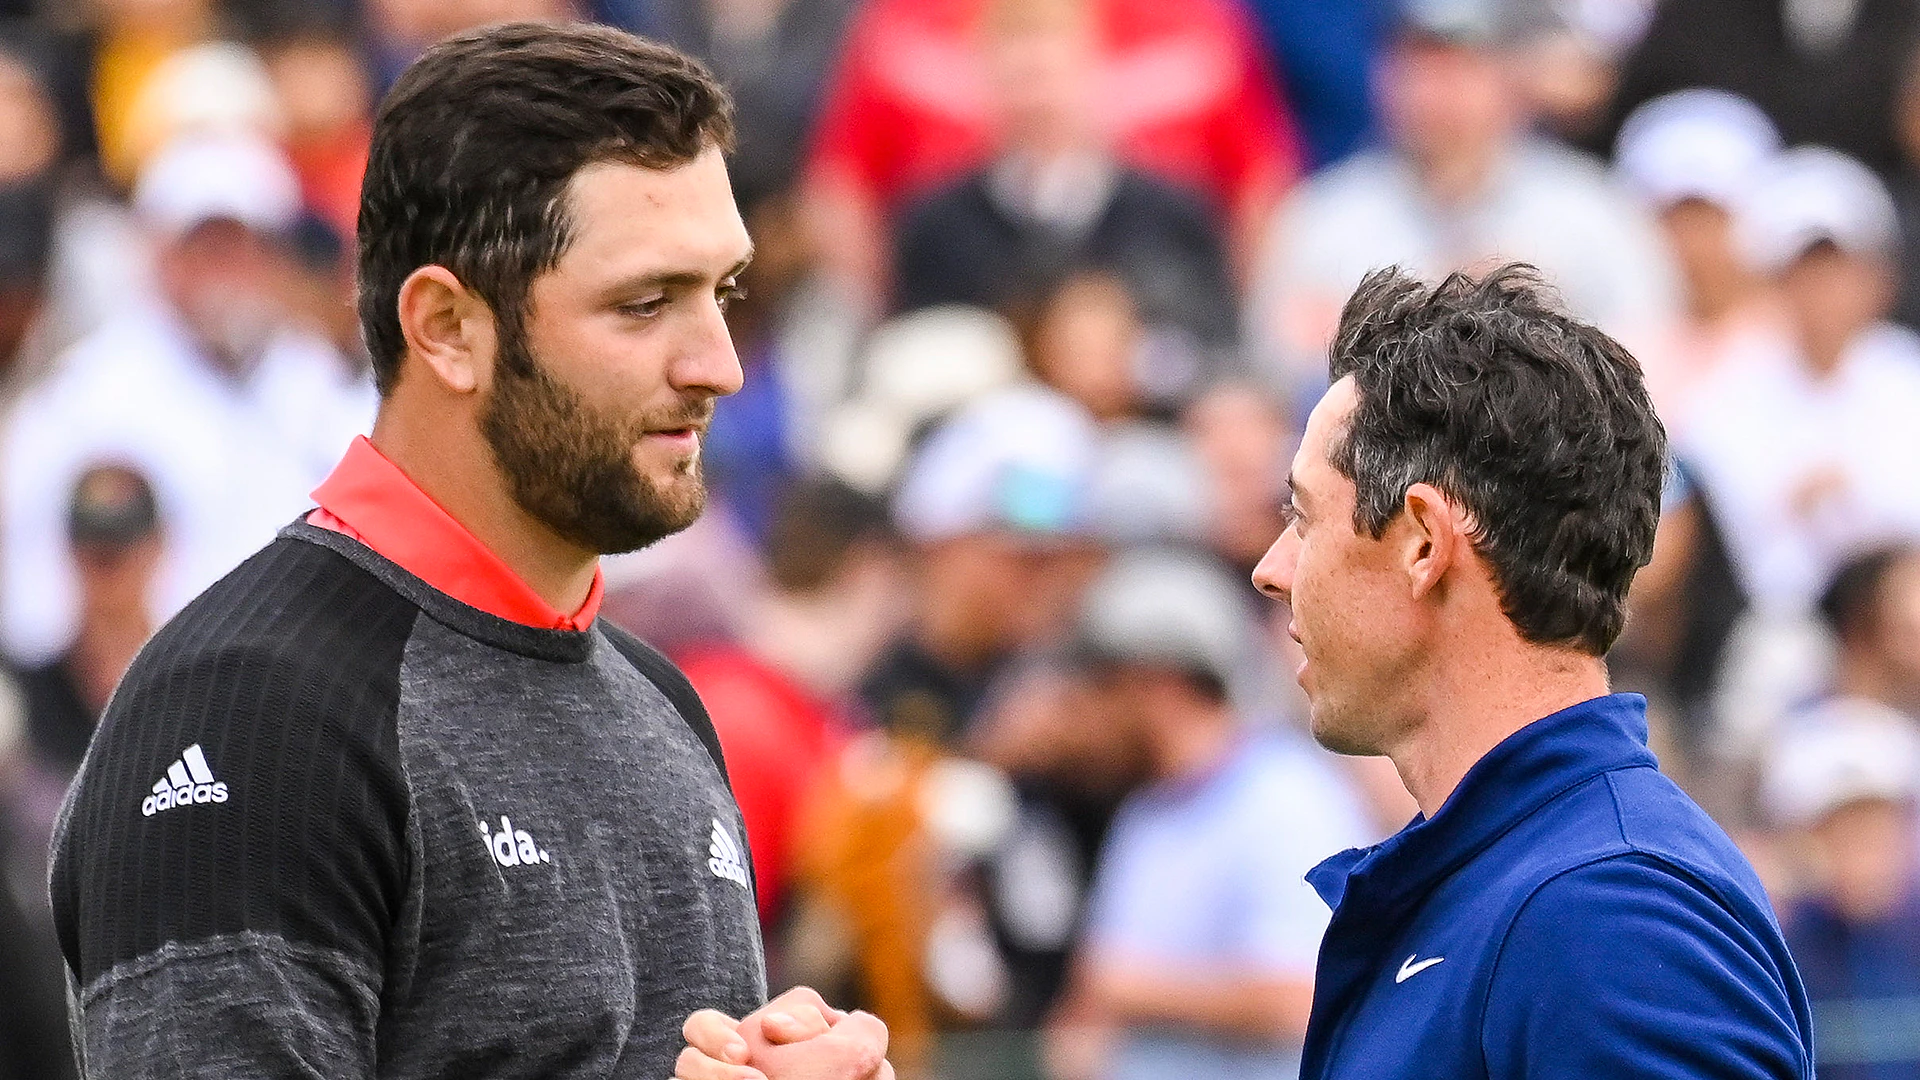 2021 Masters: New dad Jon Rahm won’t get much Masters practice and Rory McIlroy can relate